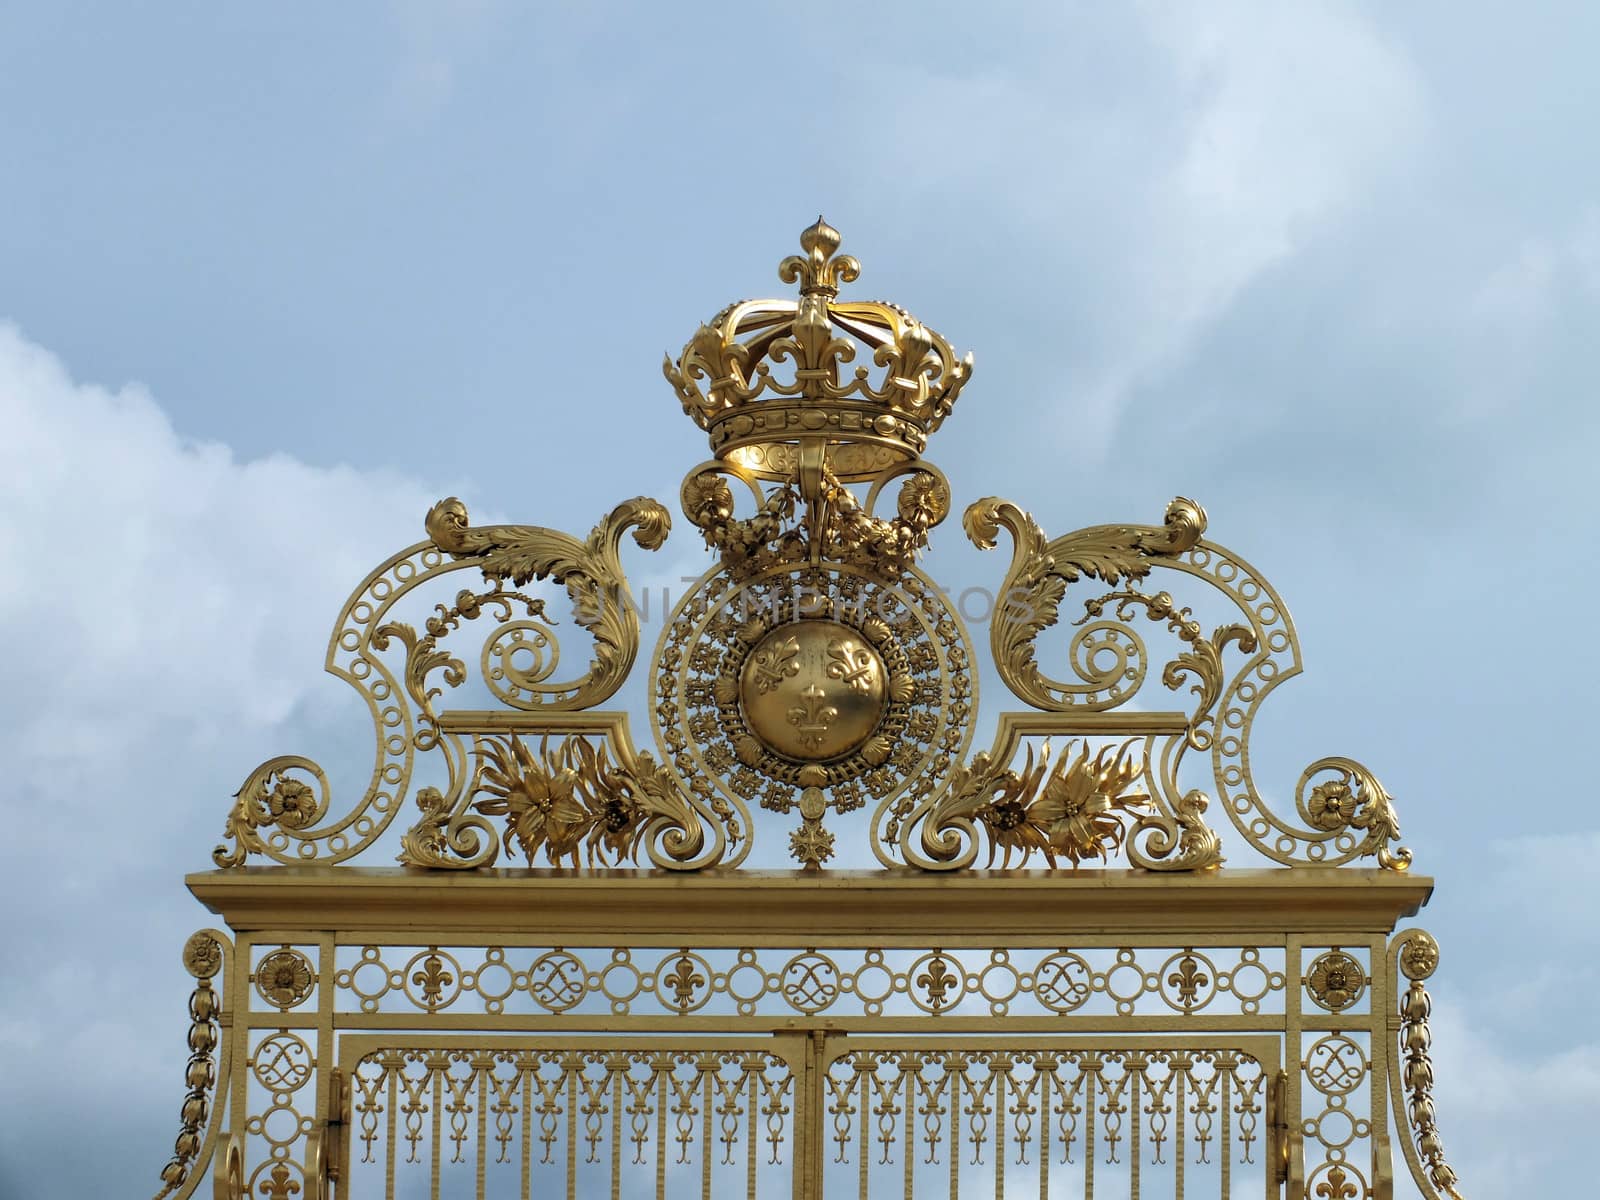 The original royal golden gates of the Palace of Versailles were demolished during the French Revolution in 1789. After over two years work to replicate the originals replacements, which stand at the entrance to the cour d'honneur, were erected in 2008.